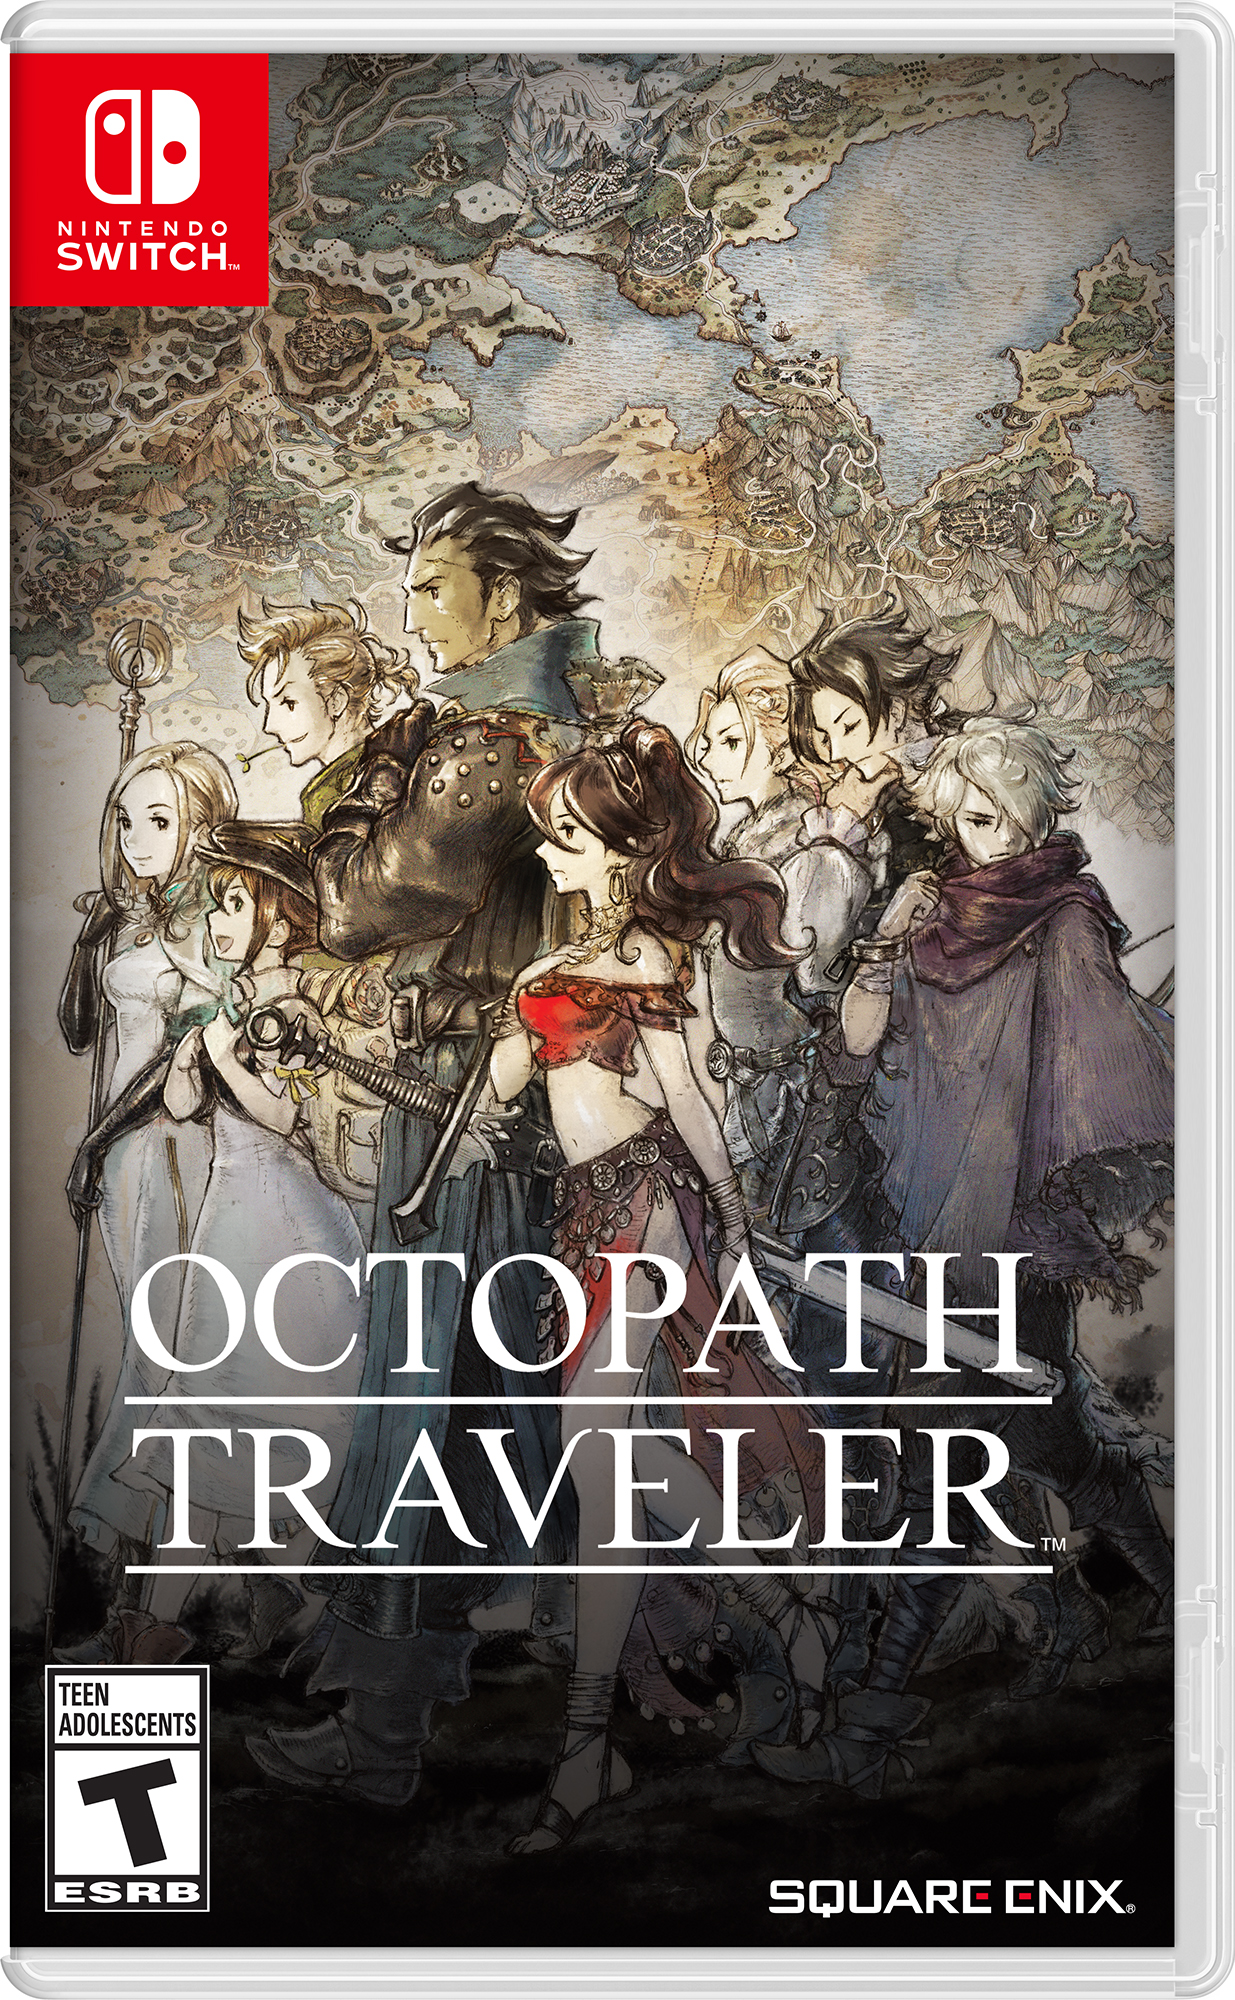 Octopath Traveler, Square Enix, Nintendo Switch, [Physical], 045496592134 - image 1 of 13